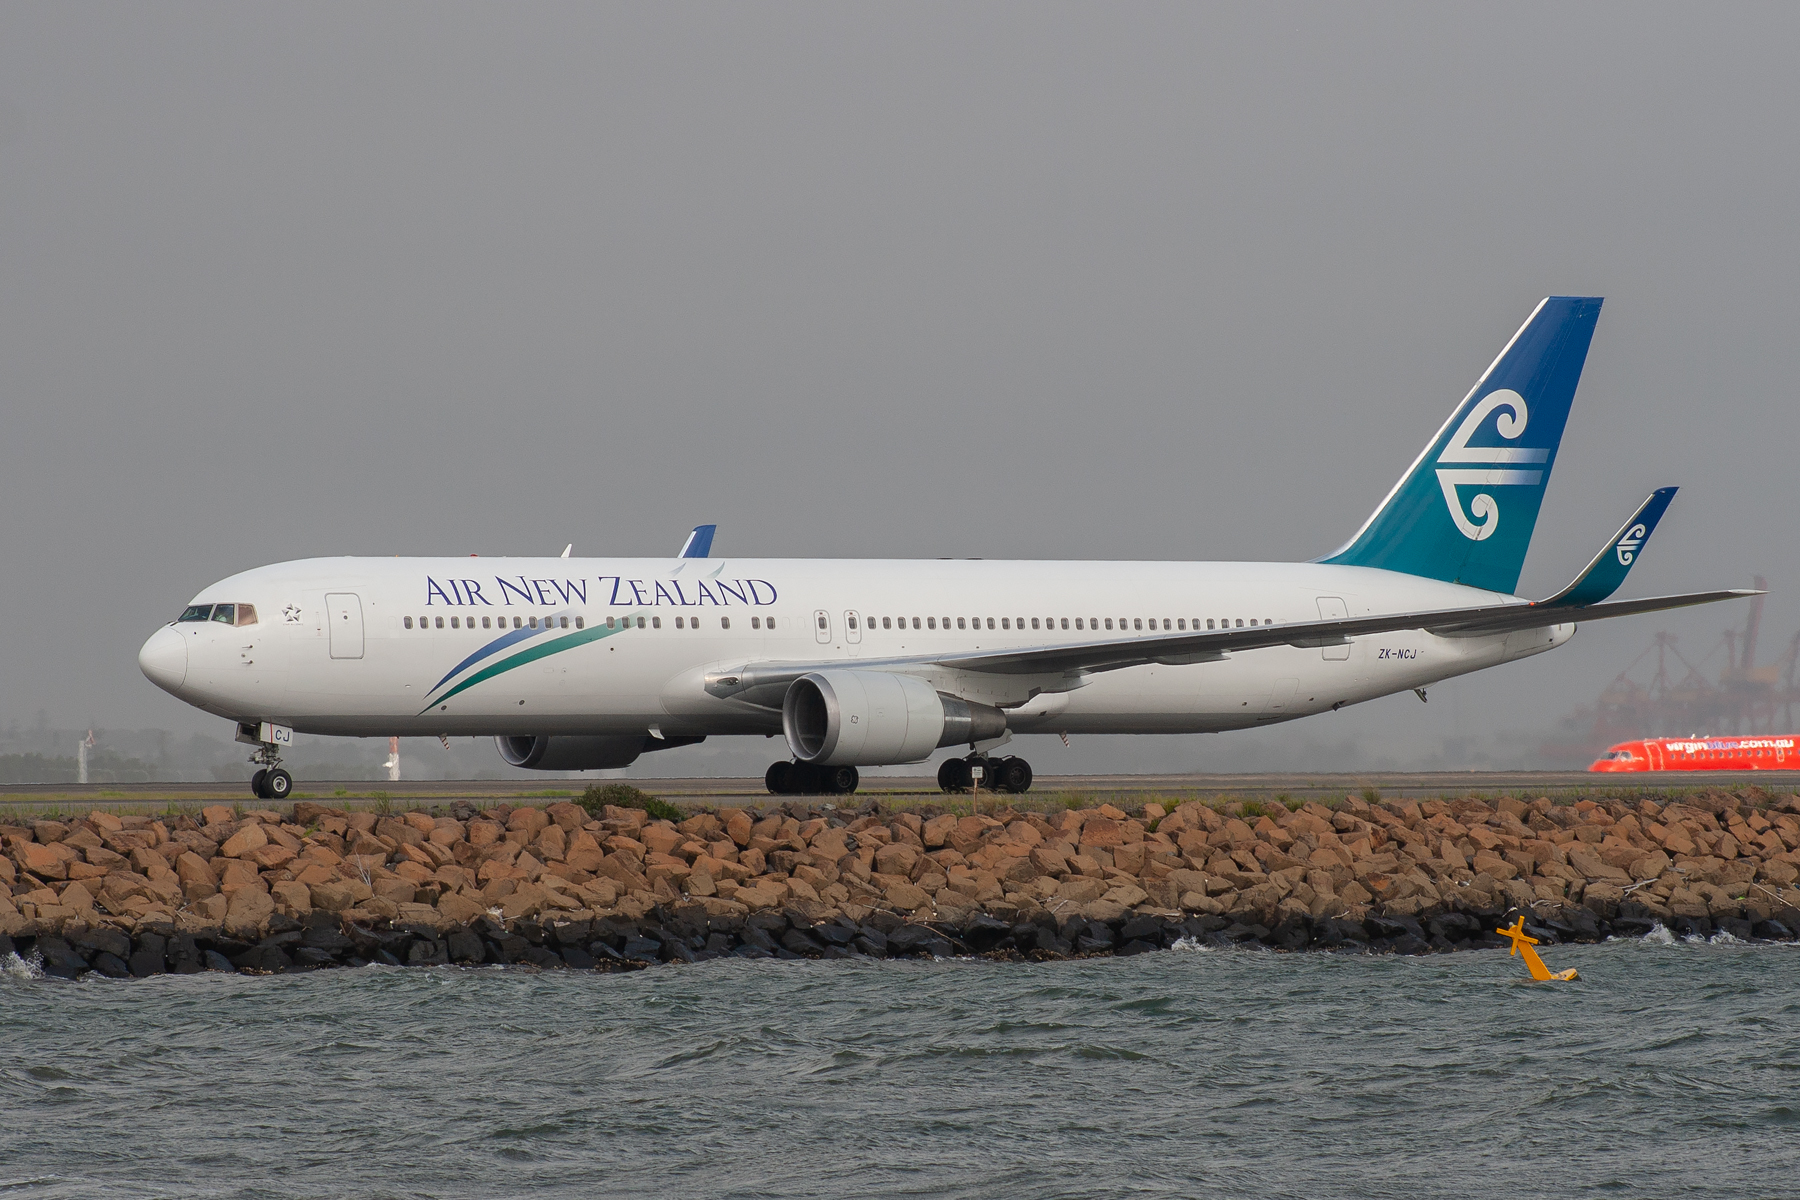 Air New Zealand Boeing 767-300 ZK-NCJ at Kingsford Smith